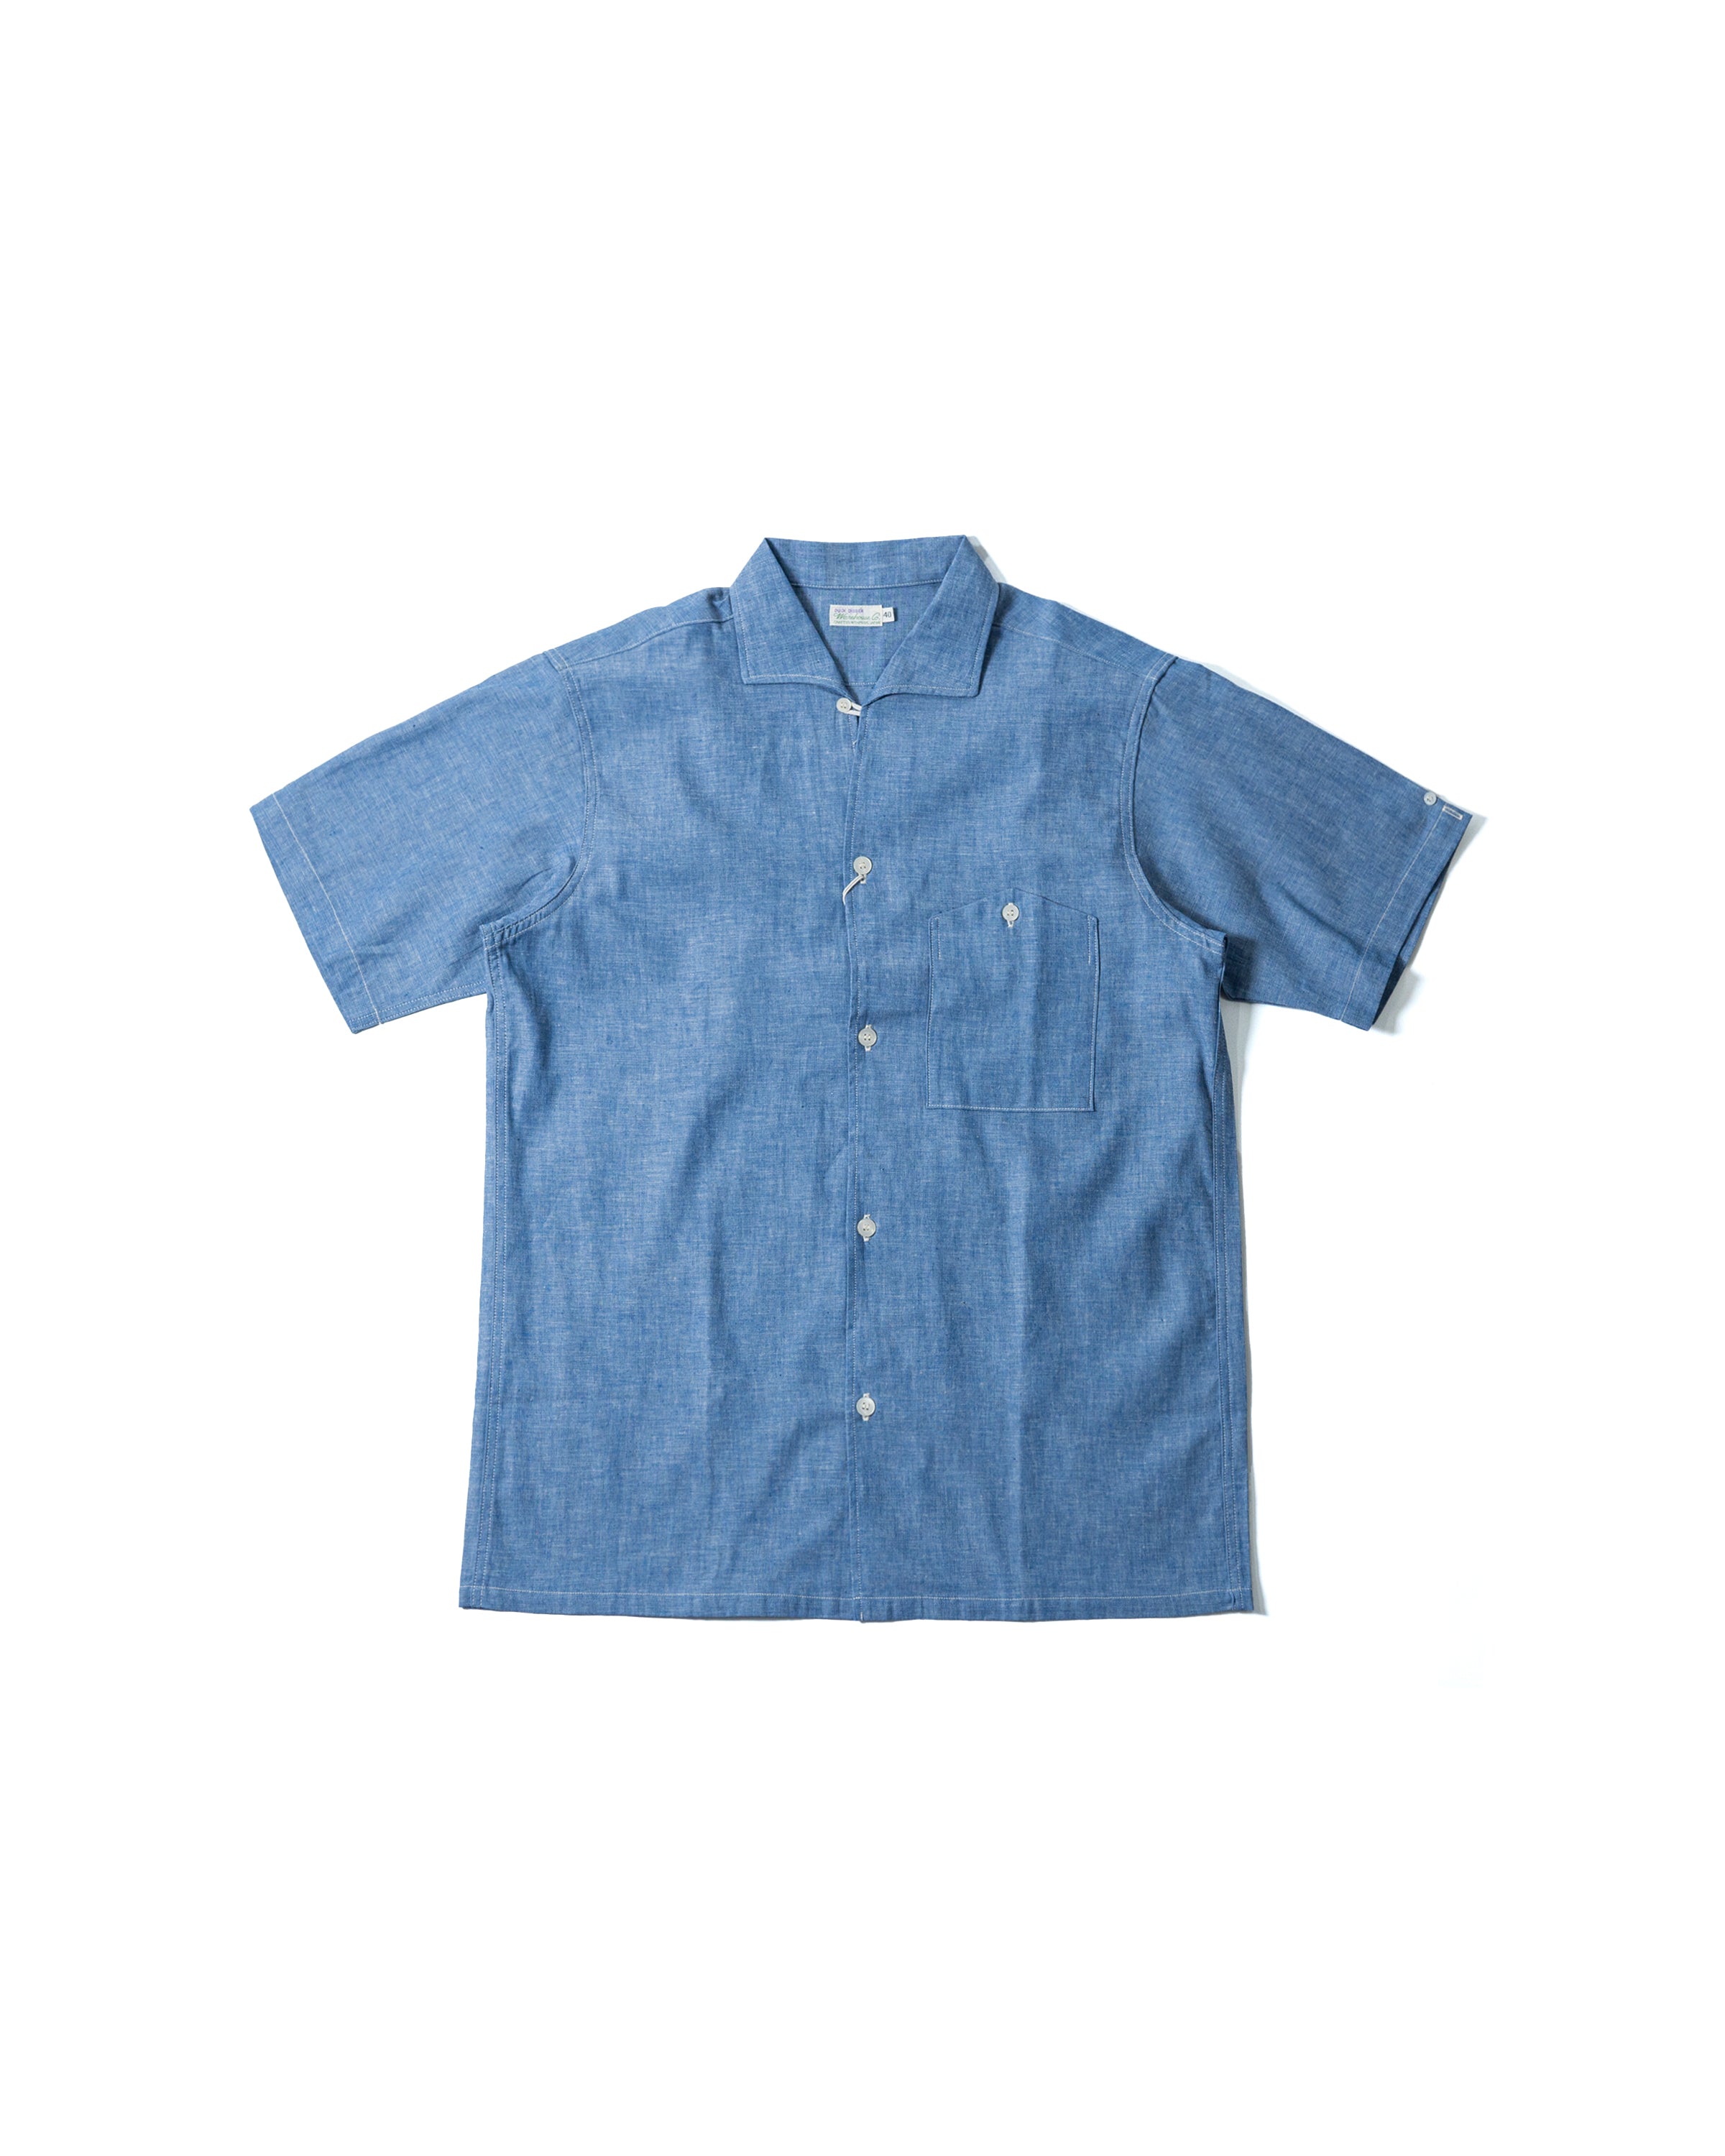 S/S Open Collar Shirts 3091 | Blue Chambray